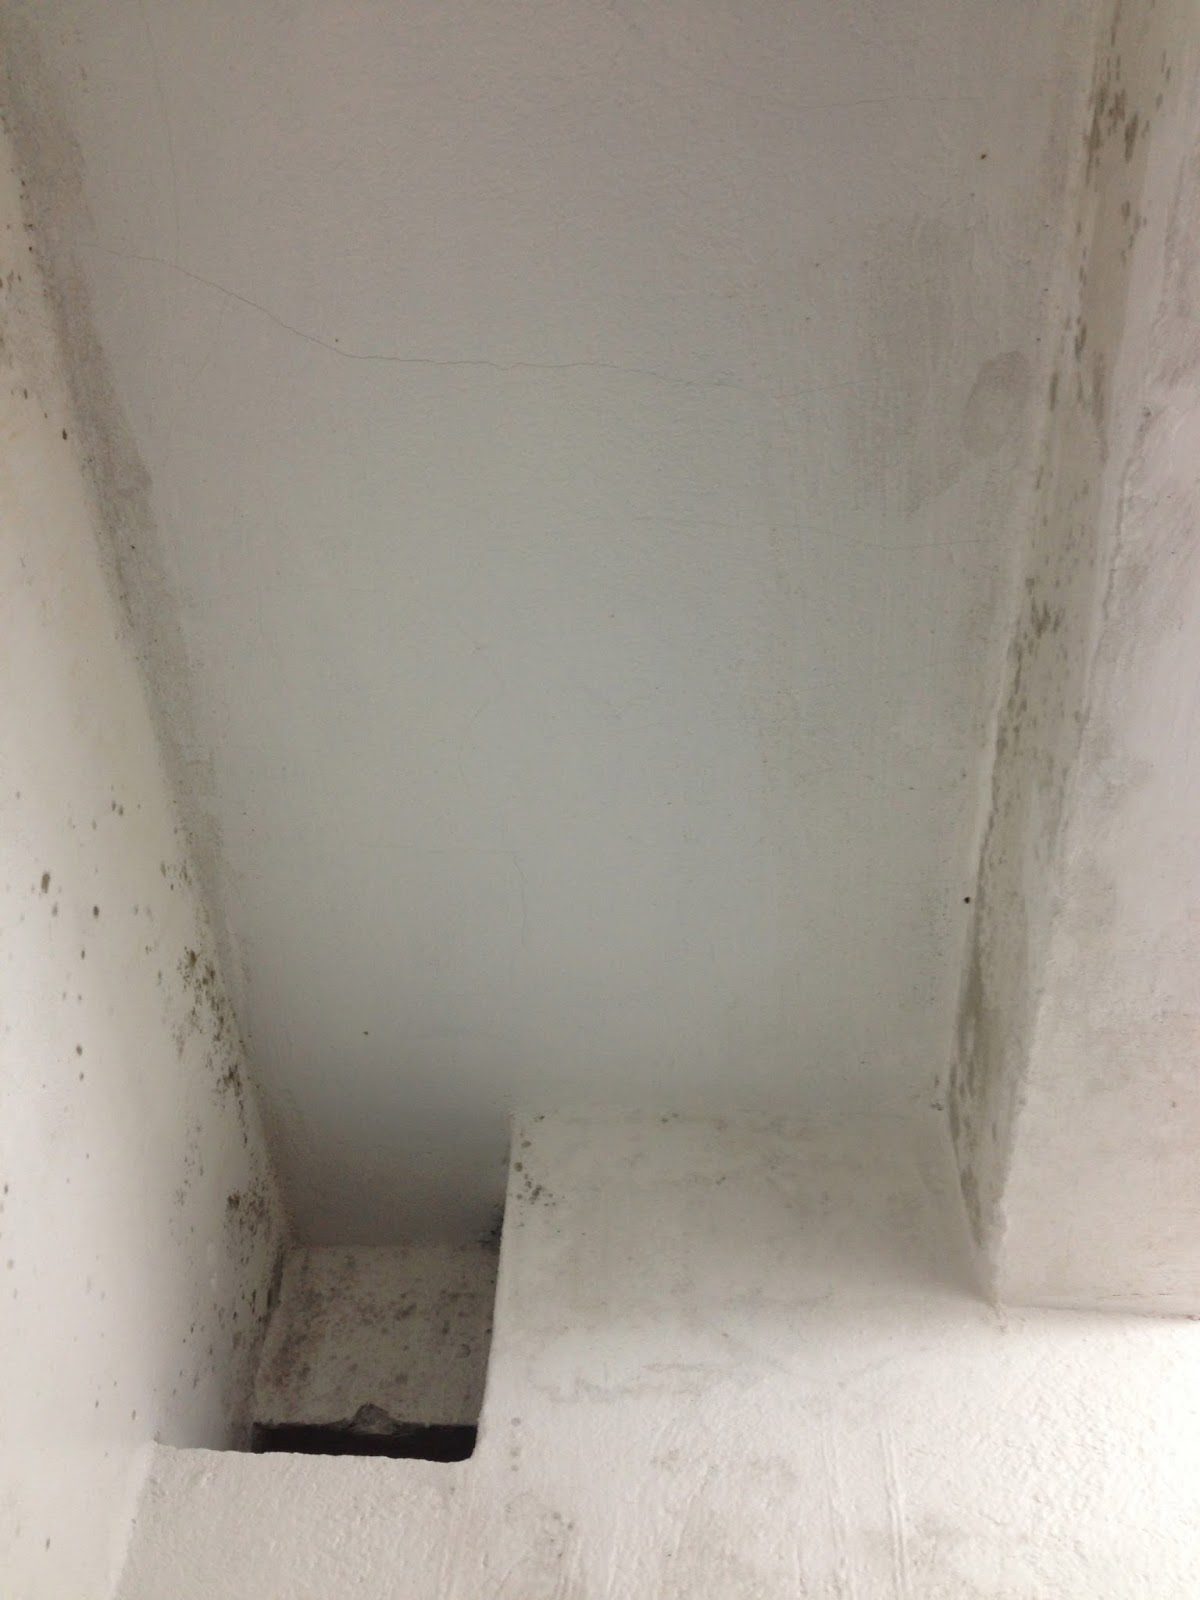 Mold on the ceilings